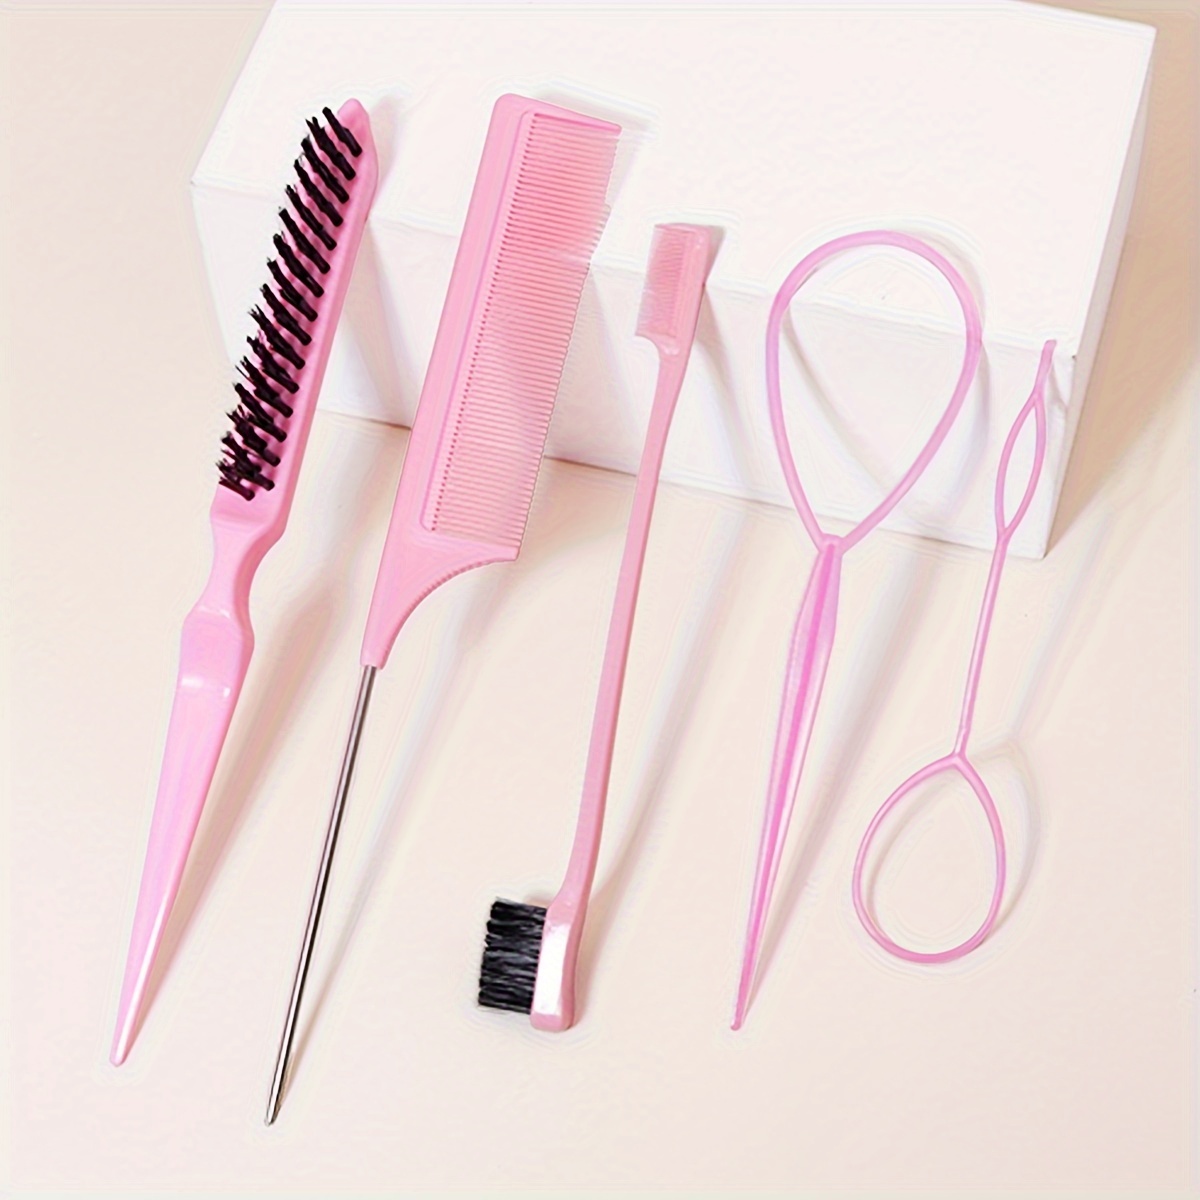 

5pcs/set Hair Styling Tool Pointed Tail Comb Hair Edge Brush Double Head Brush Eyebrow Brush Hair Buns Makers Hairdressing Accessories Travel Essentials